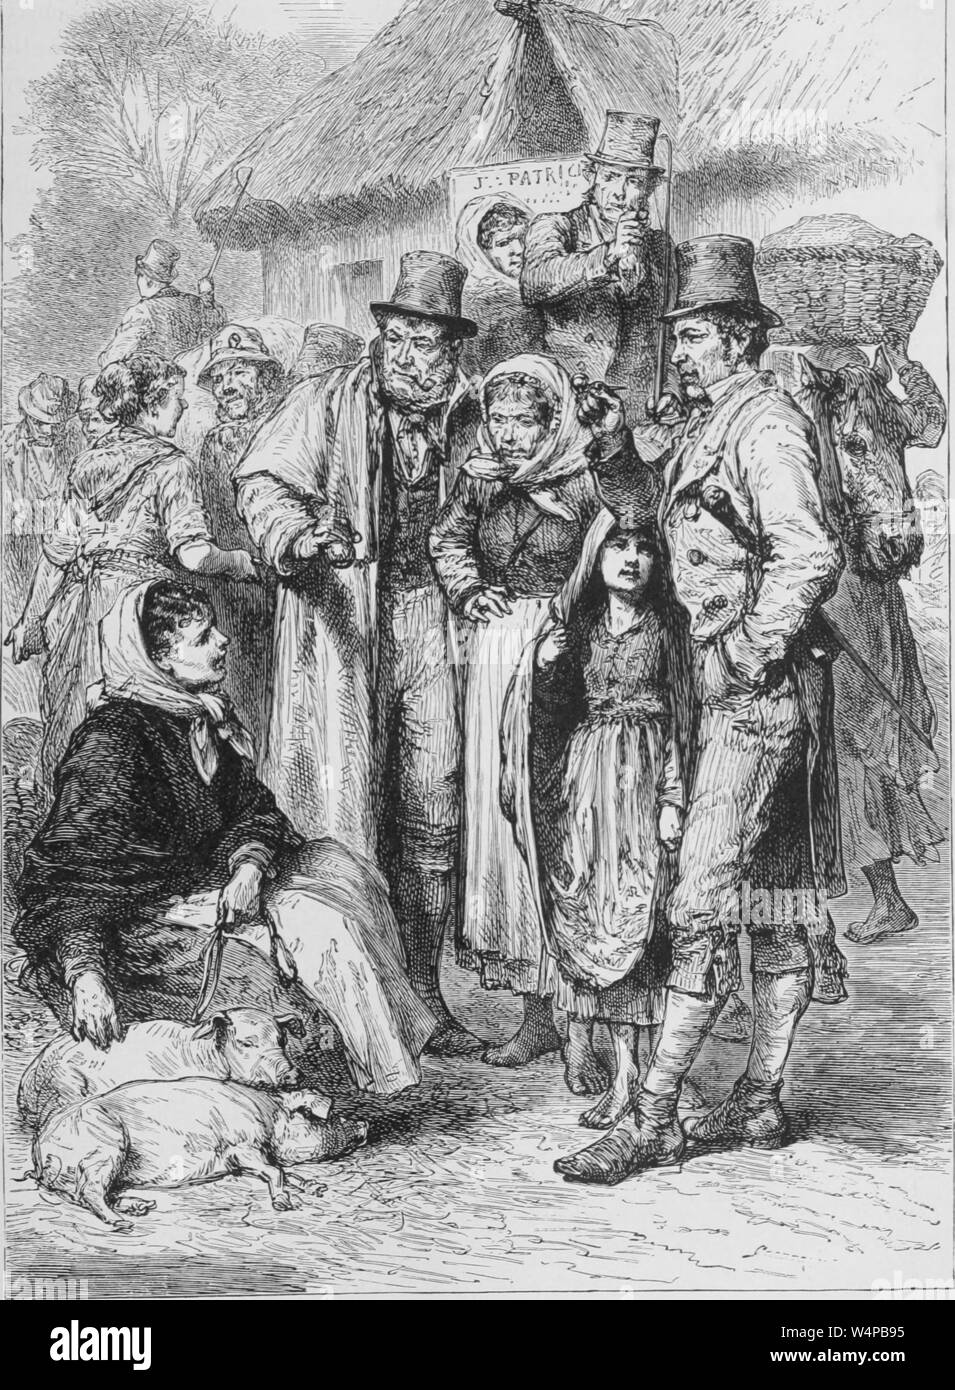 Engraving of the Irish peasants and landlords at the market, from the book 'The earth and its inhabitants' by Elisee Reclus, 1881. Courtesy Internet Archive. () Stock Photo